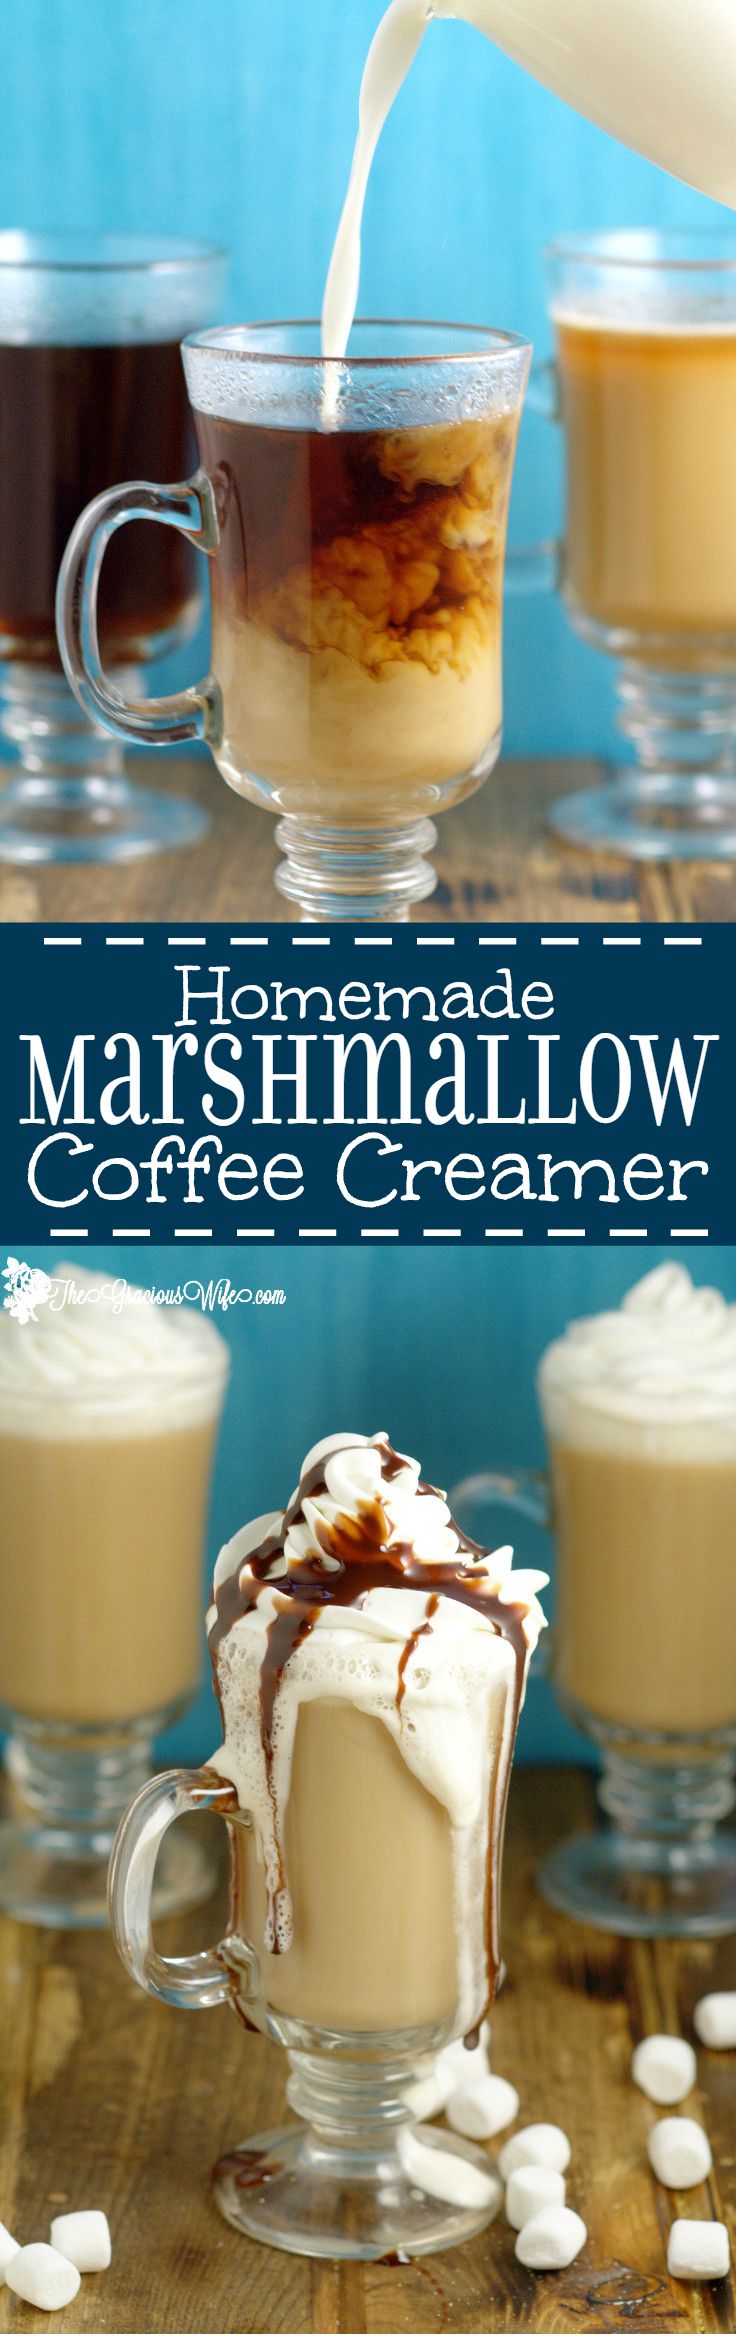 Homemade Marshmallow Coffee Creamer Recipe- A yummy, fun way to change up your morning coffee. It can be made in just 10 minutes, and is a great grown-up treat. 